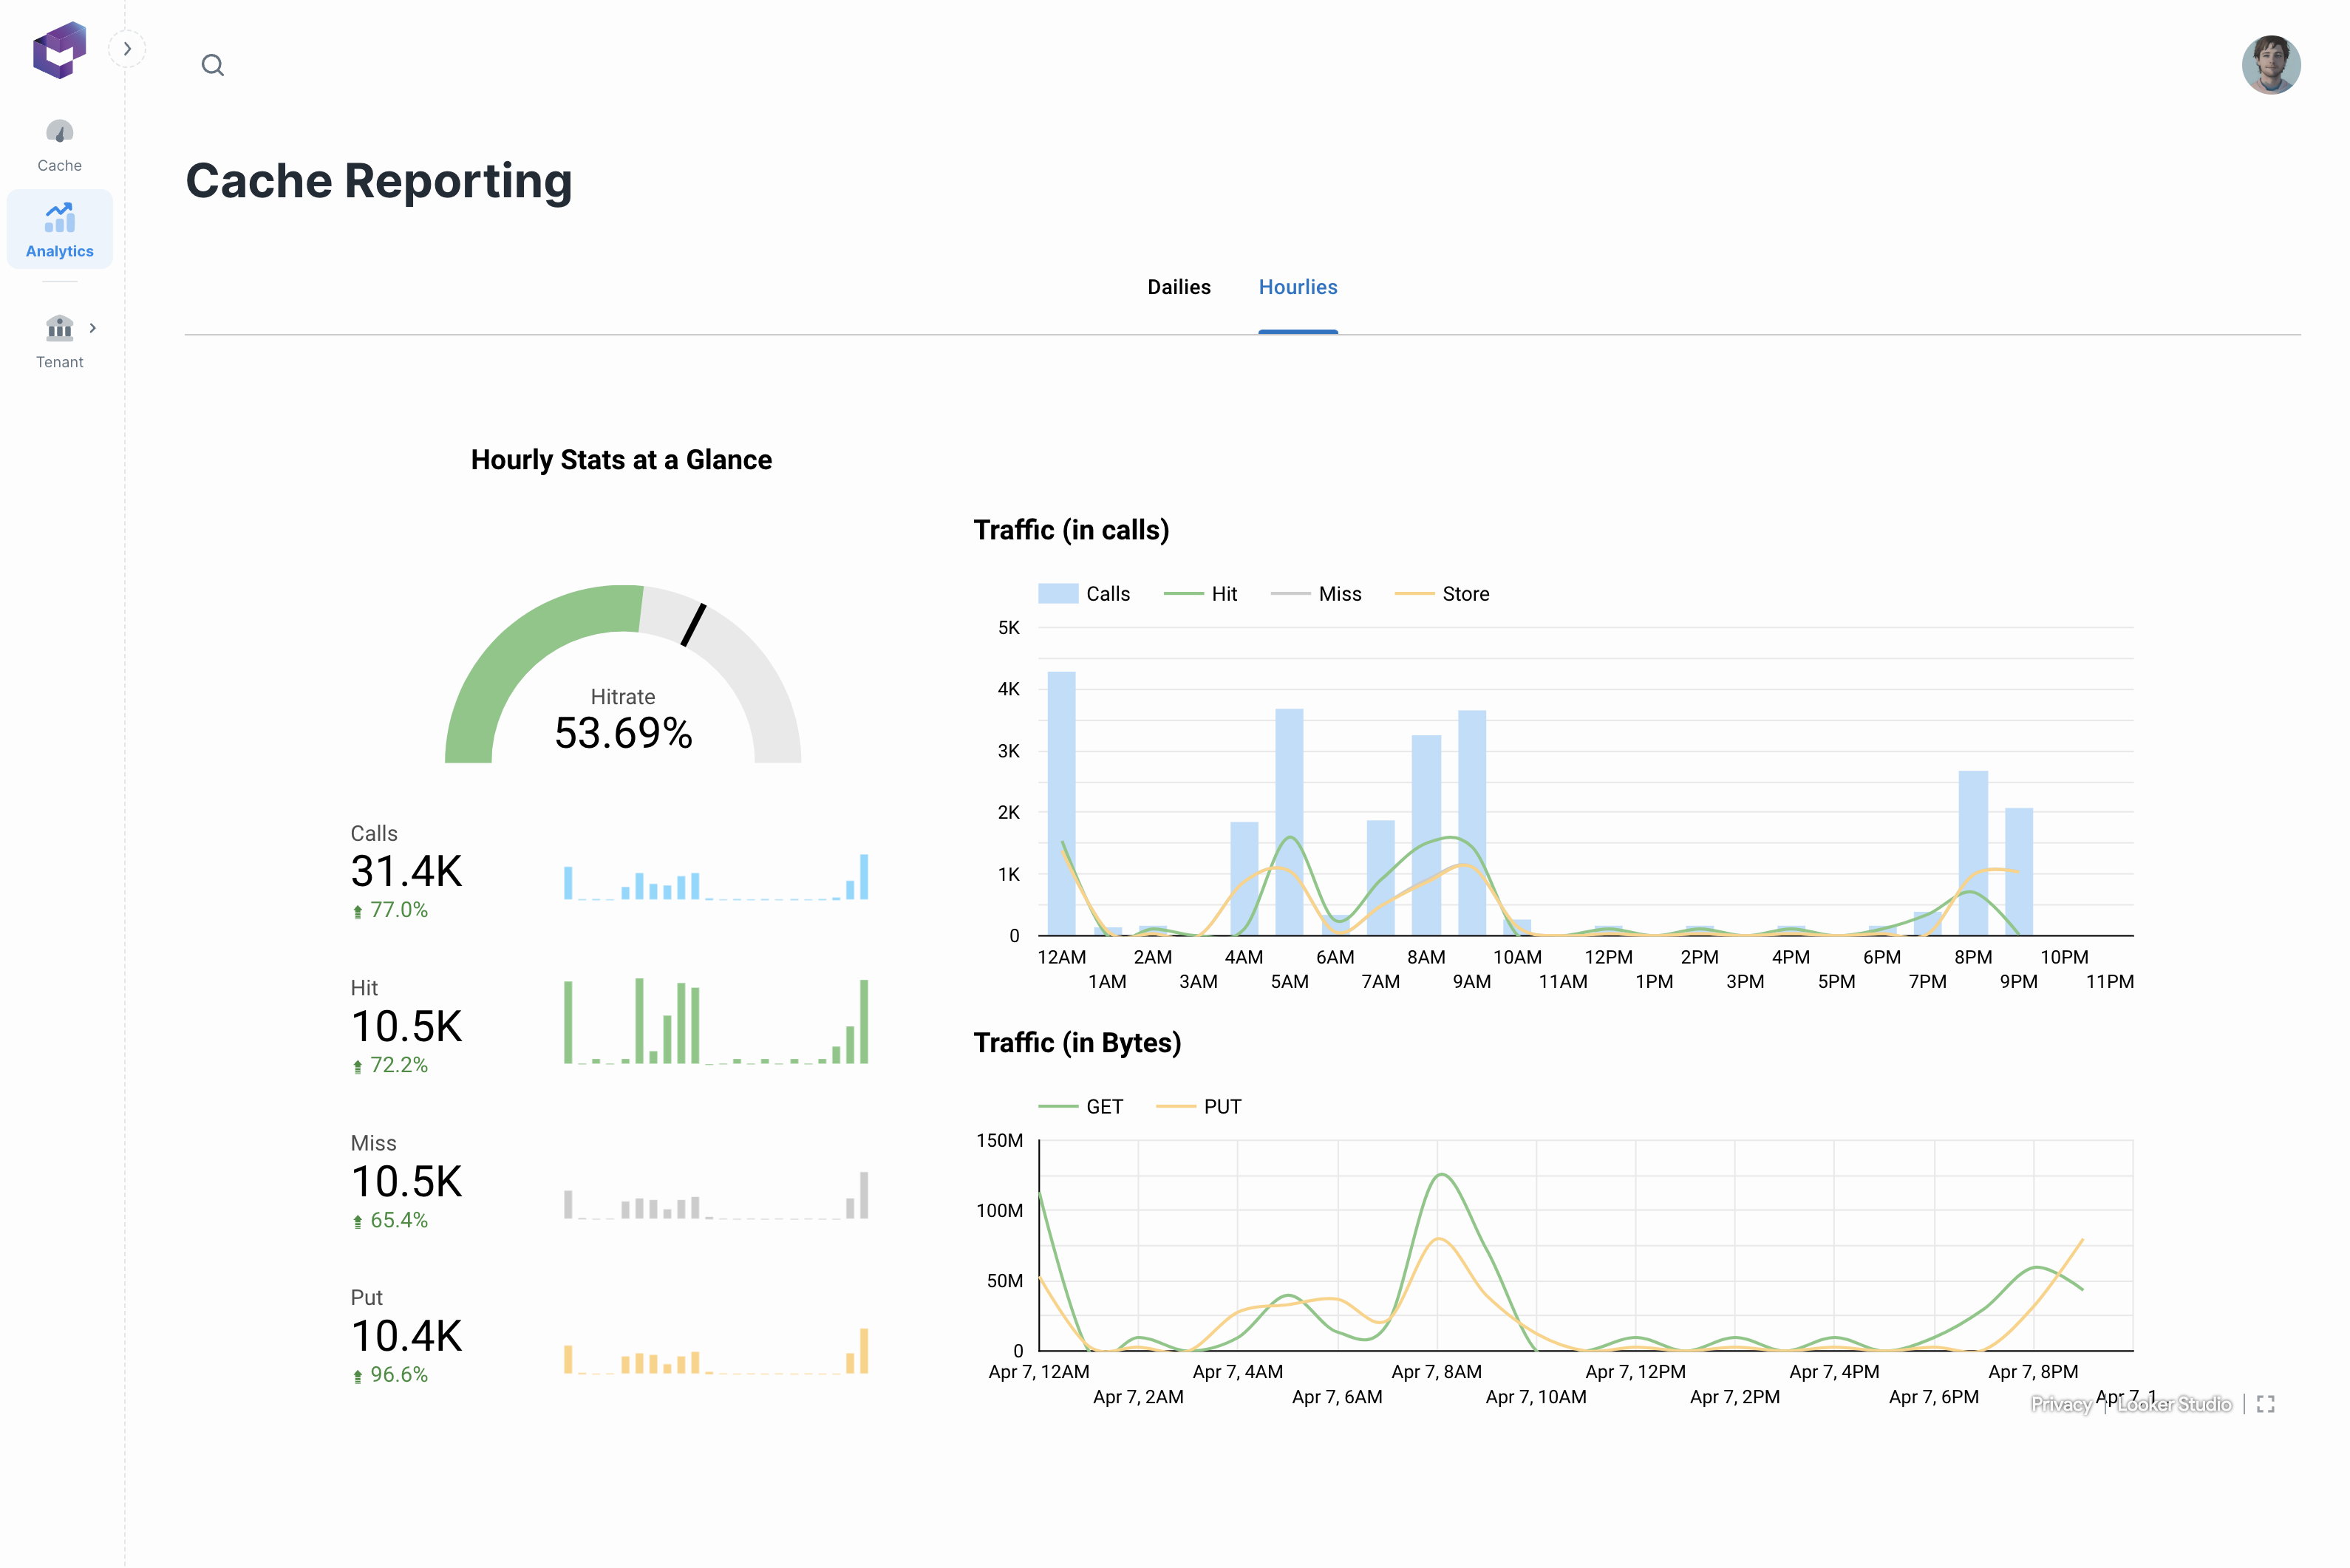 Buildless Console screenshot depicting the analytics section, with multiple charts and metrics for cache reporting